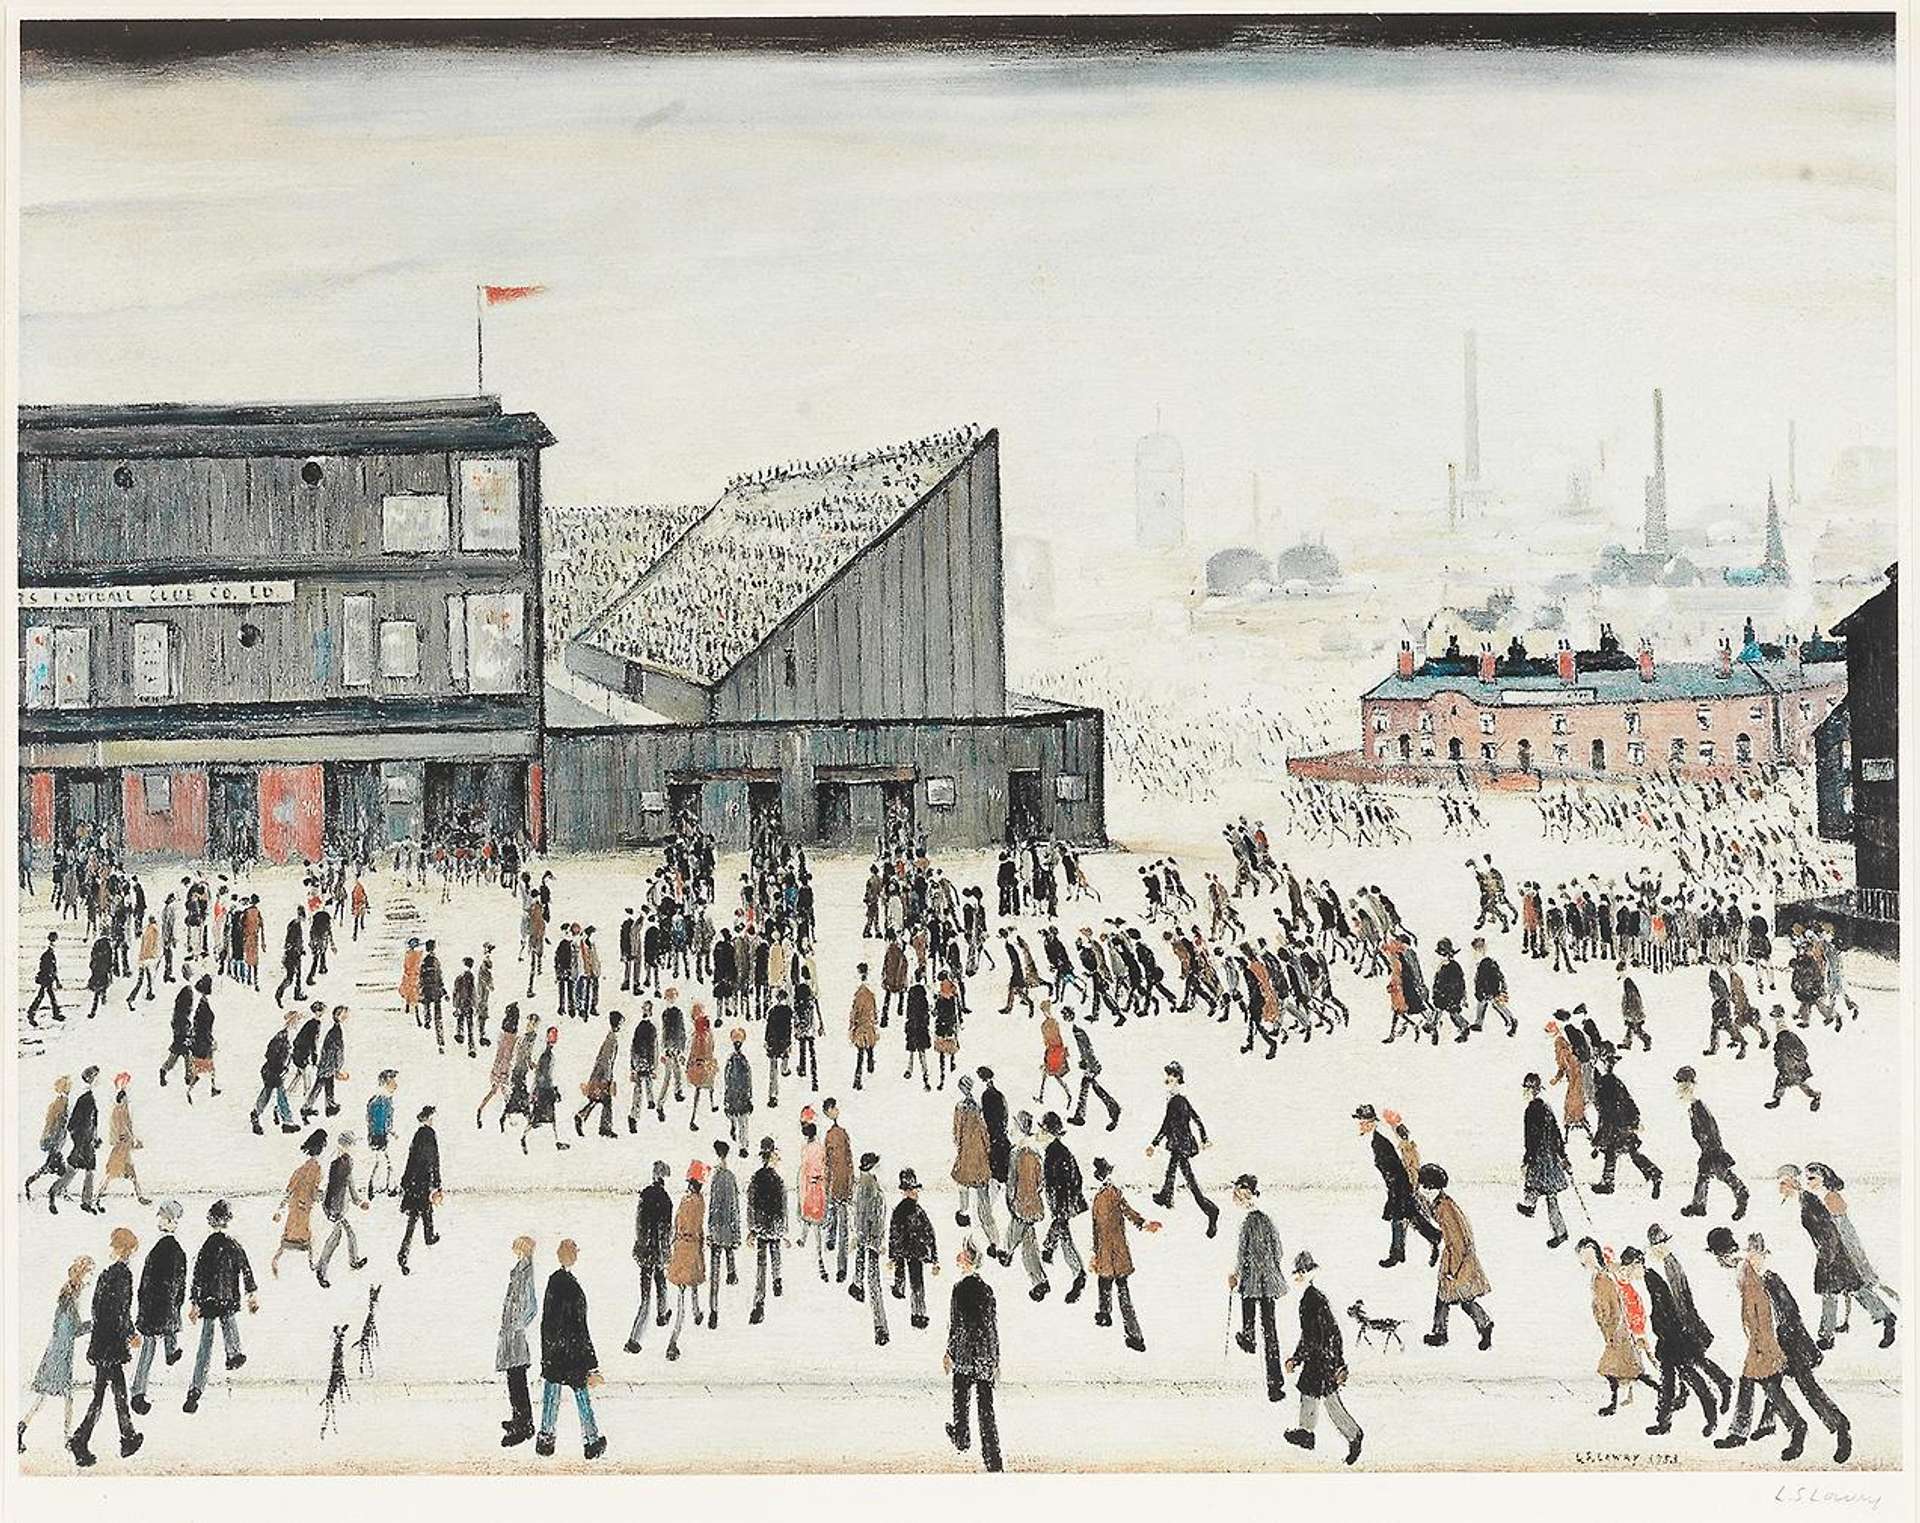 A scene depicting a crowd walking about The Bolton Wanderers football club in Burnden Park.